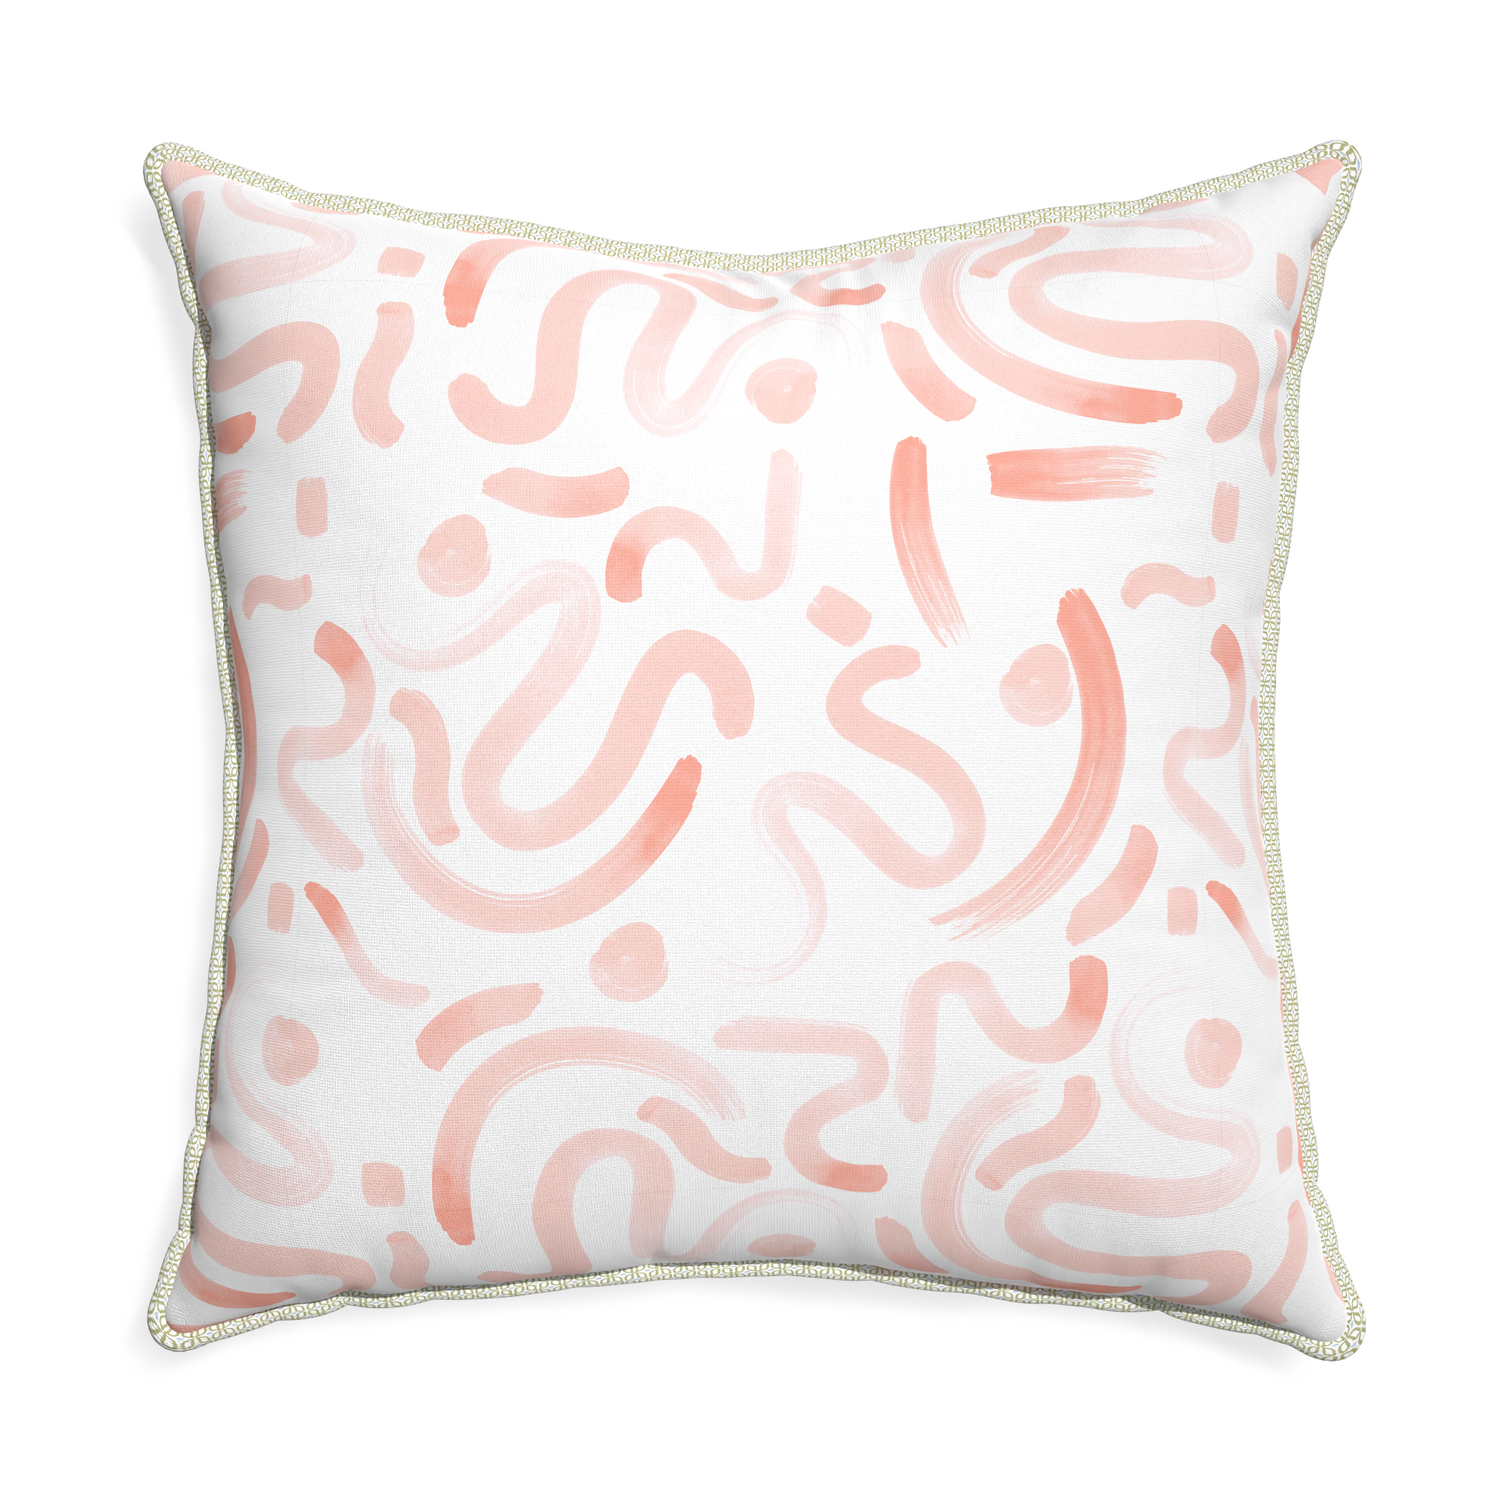 Euro-sham hockney pink custom pillow with l piping on white background